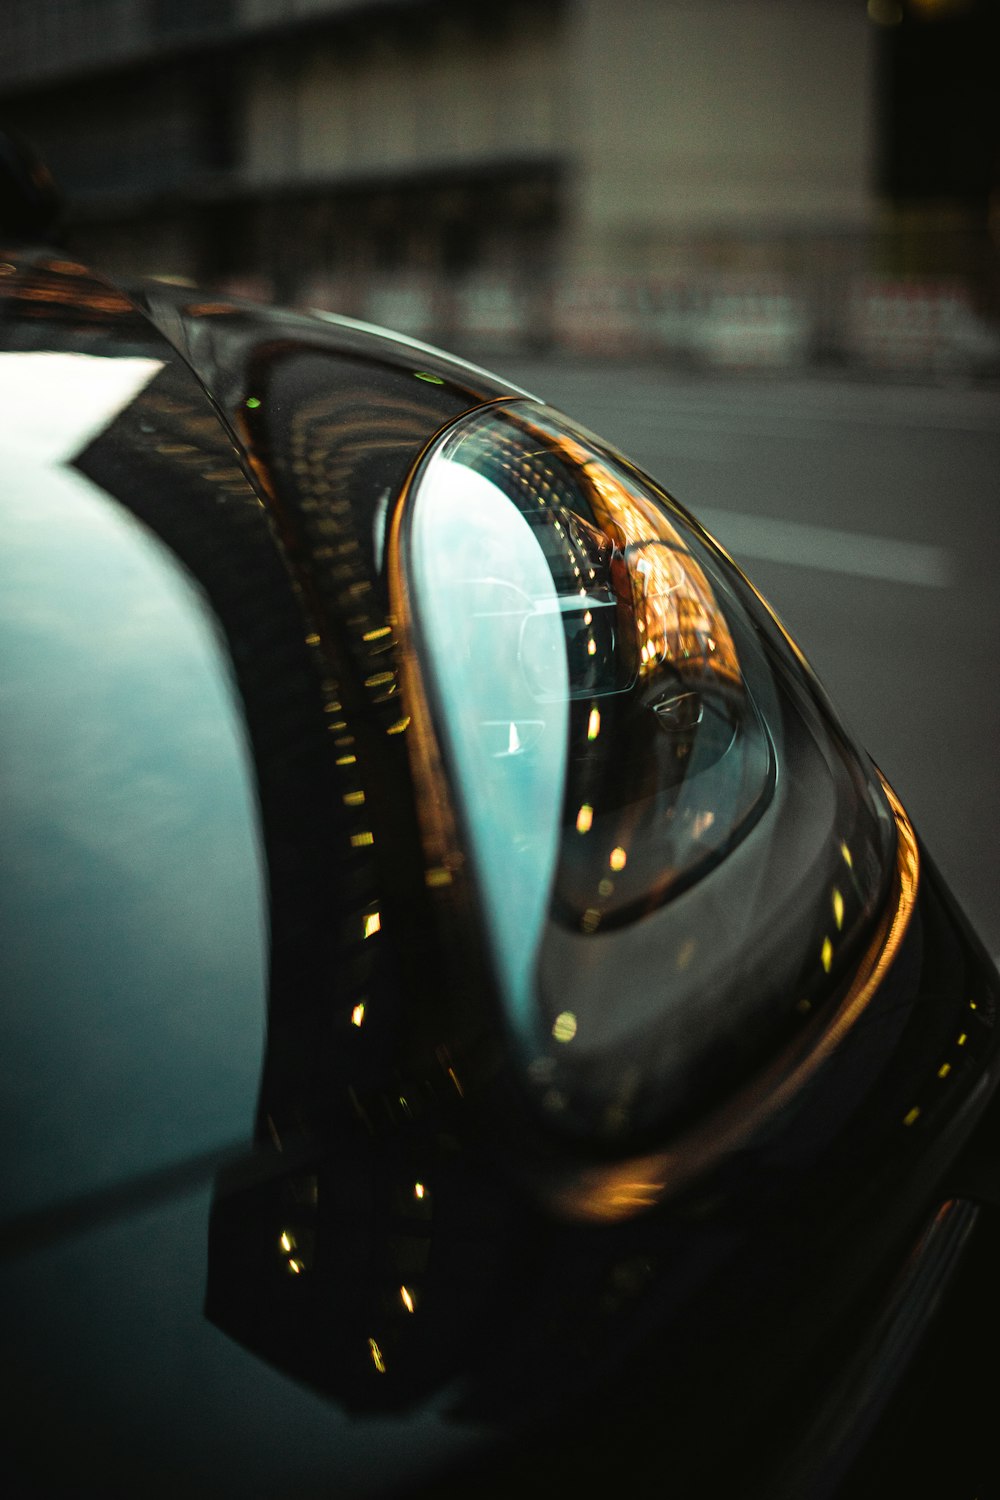 a close up of a car's rear view mirror